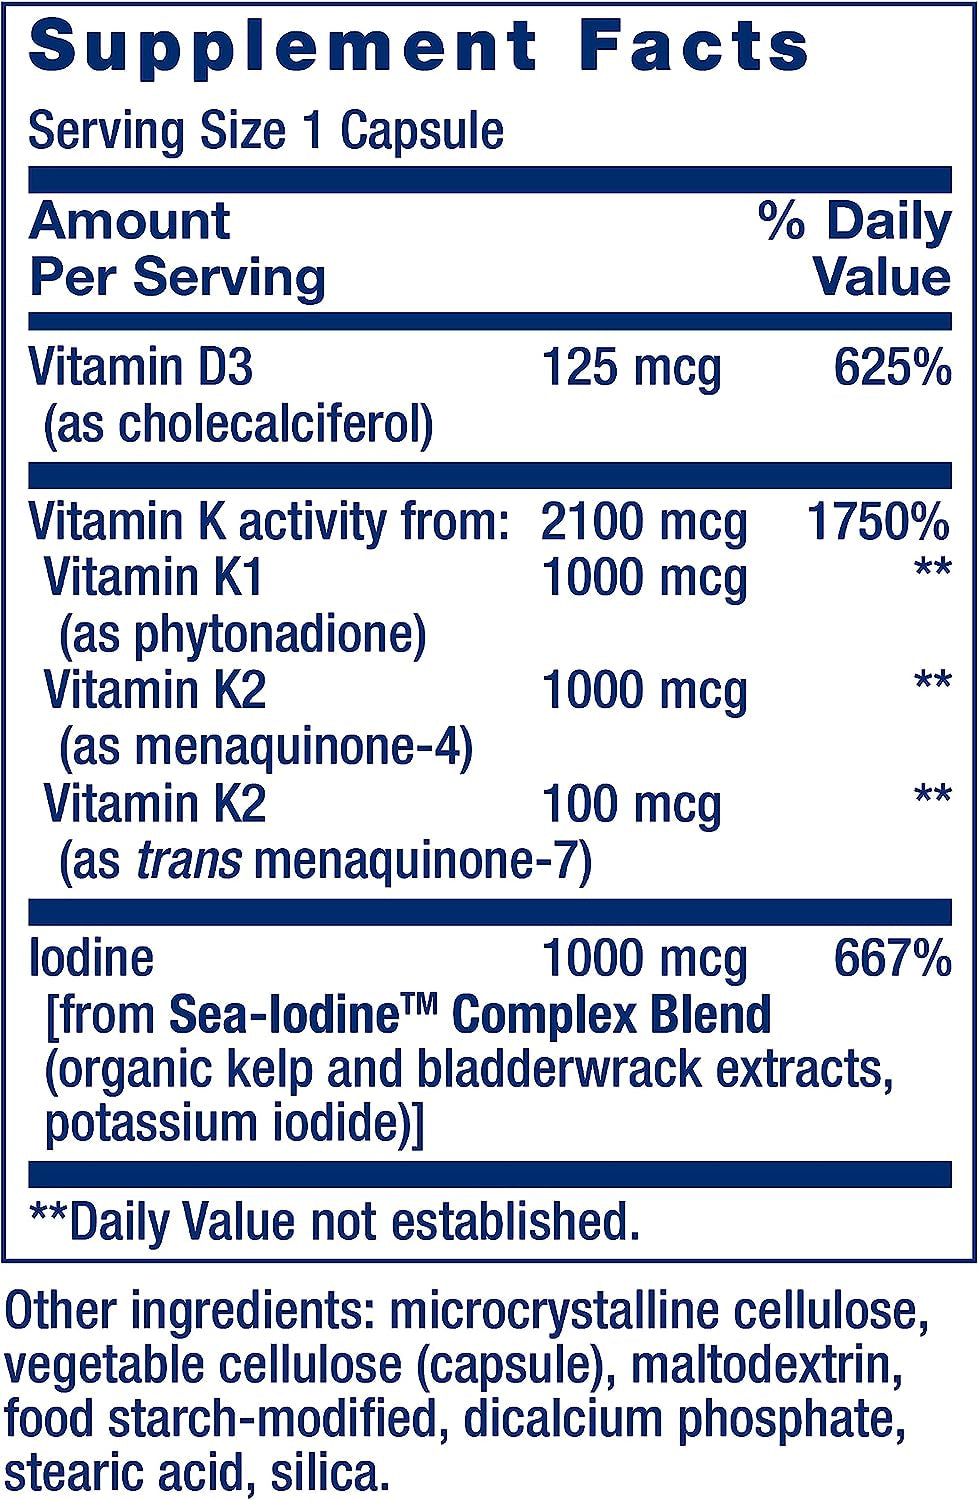 Life Extension Vitamins D and K with Sea-Iodine, Vitamin D3, Vitamin K1 and K2, Iodine, Supports Immune, Bone, Arterial and Thyroid Health, Non-Gmo, Gluten-Free, 60 Capsules